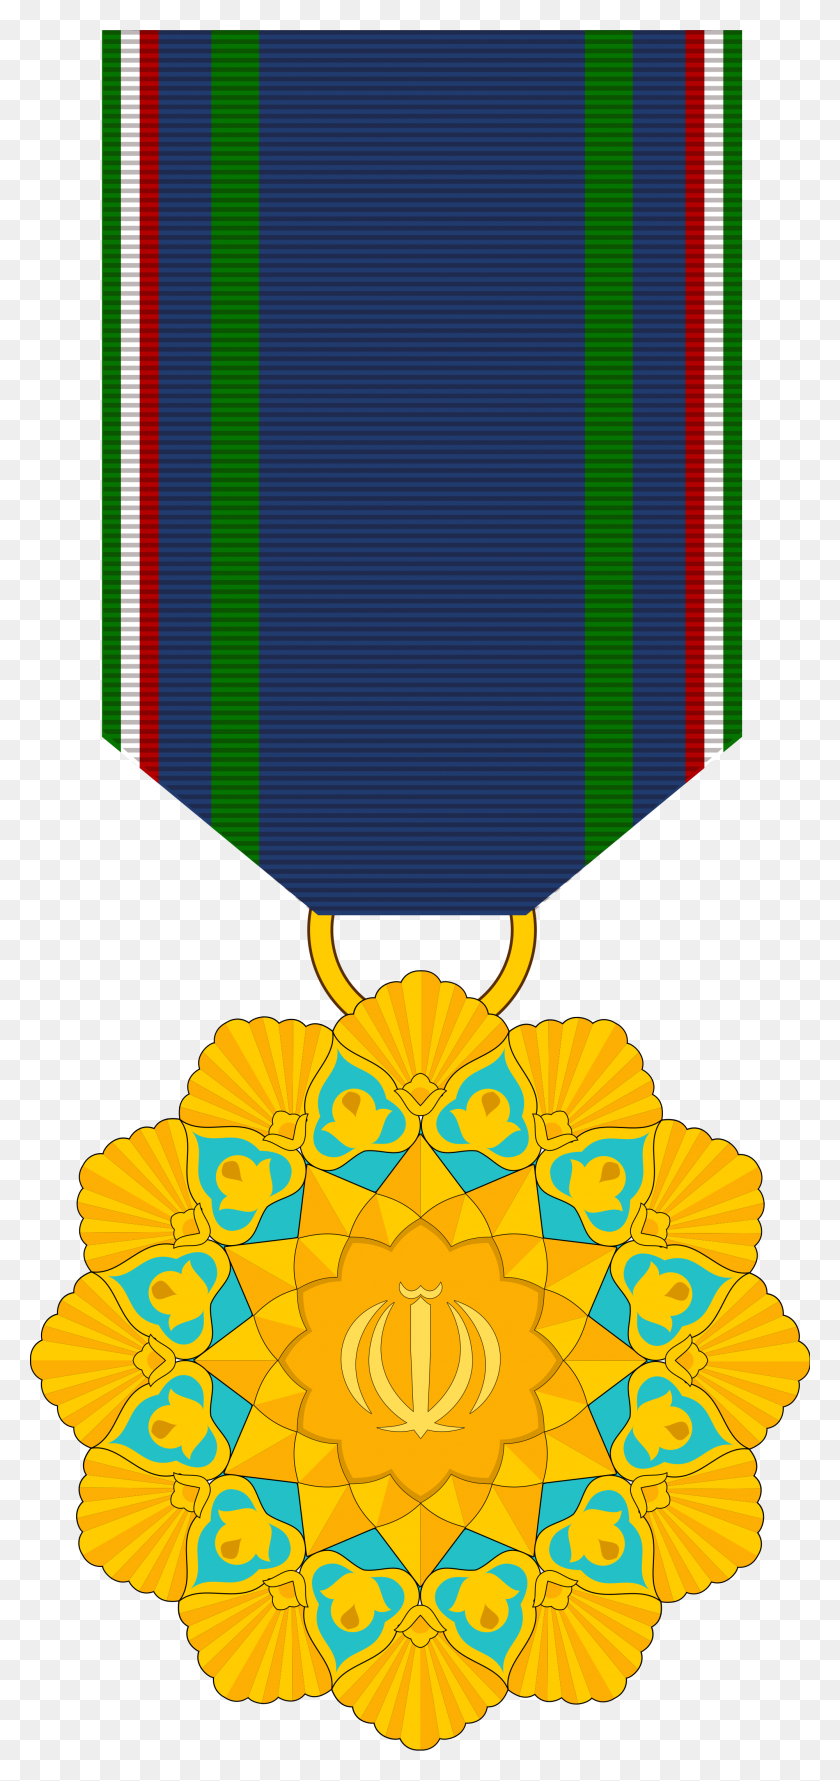 2000x4415 Islamic Republic Medal Of Honor - Medal Of Honor PNG